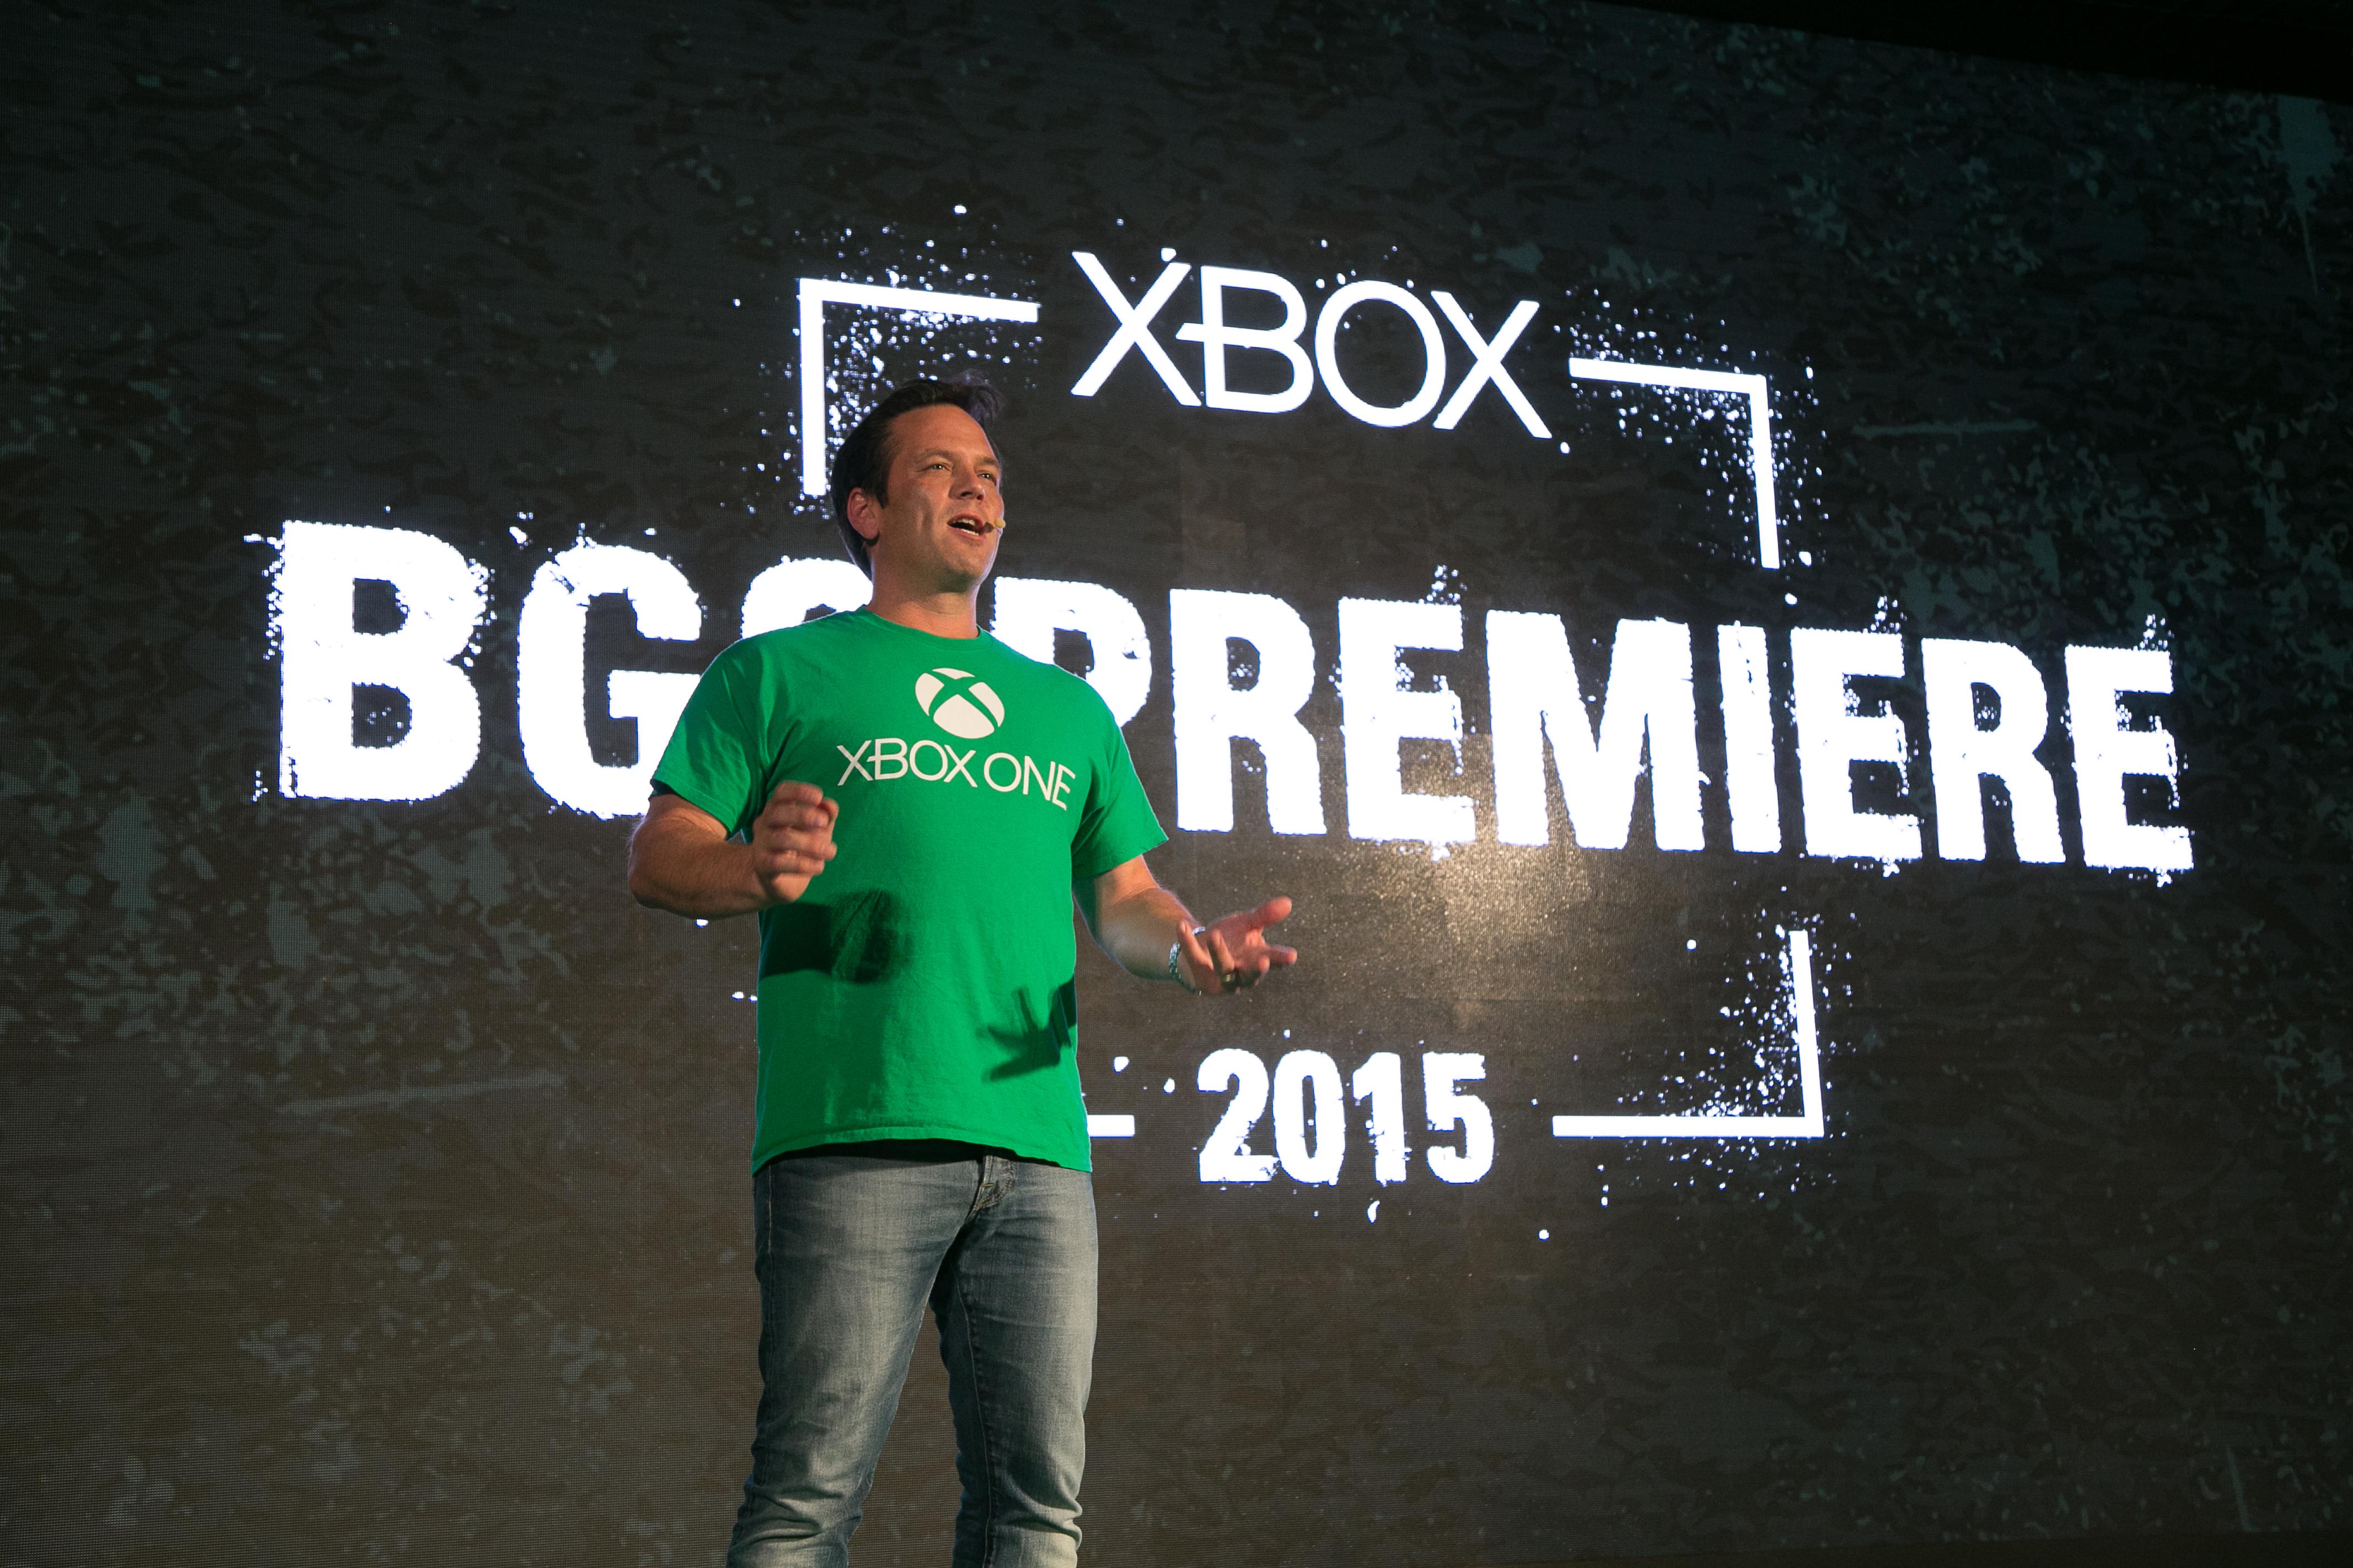 Checking in from Latin America's Biggest Gaming Event - Xbox Wire